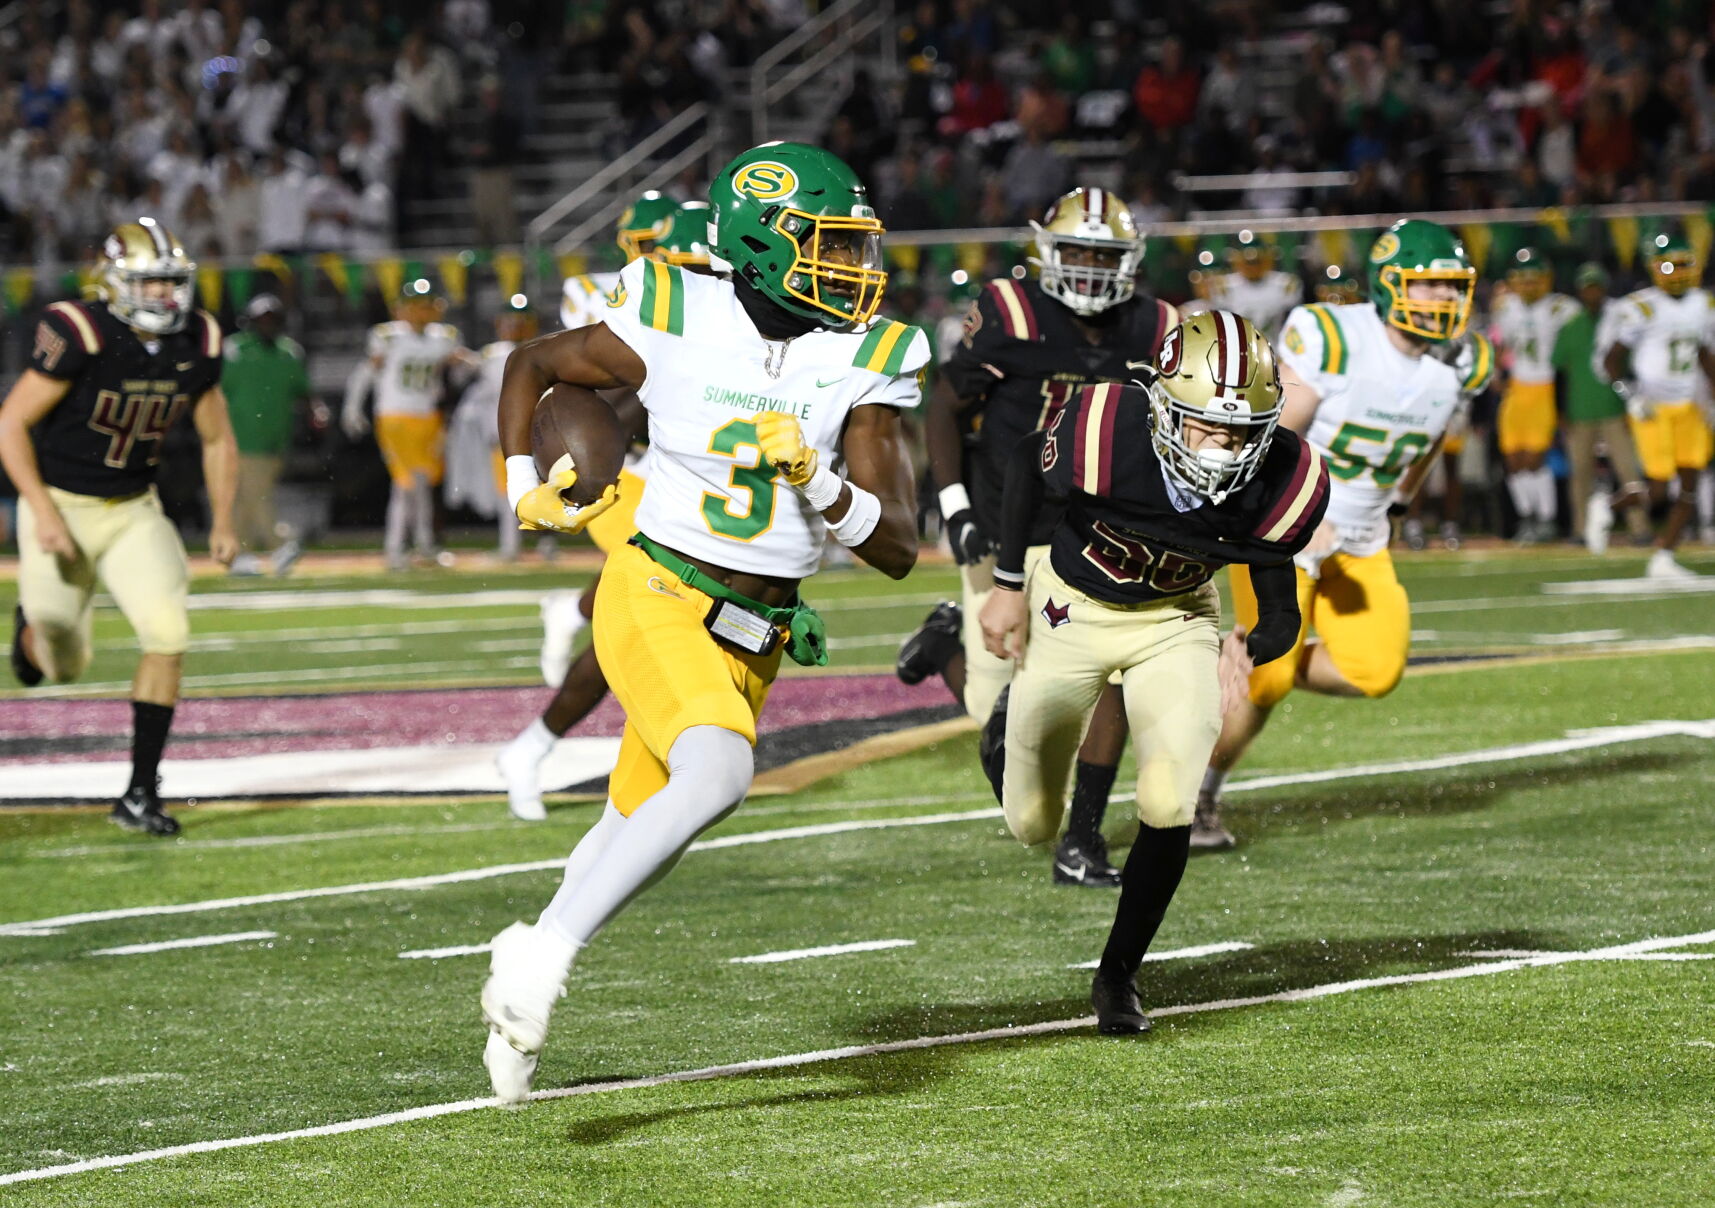 Summerville defeats Ashley Ridge 42-38 in a thrilling football game